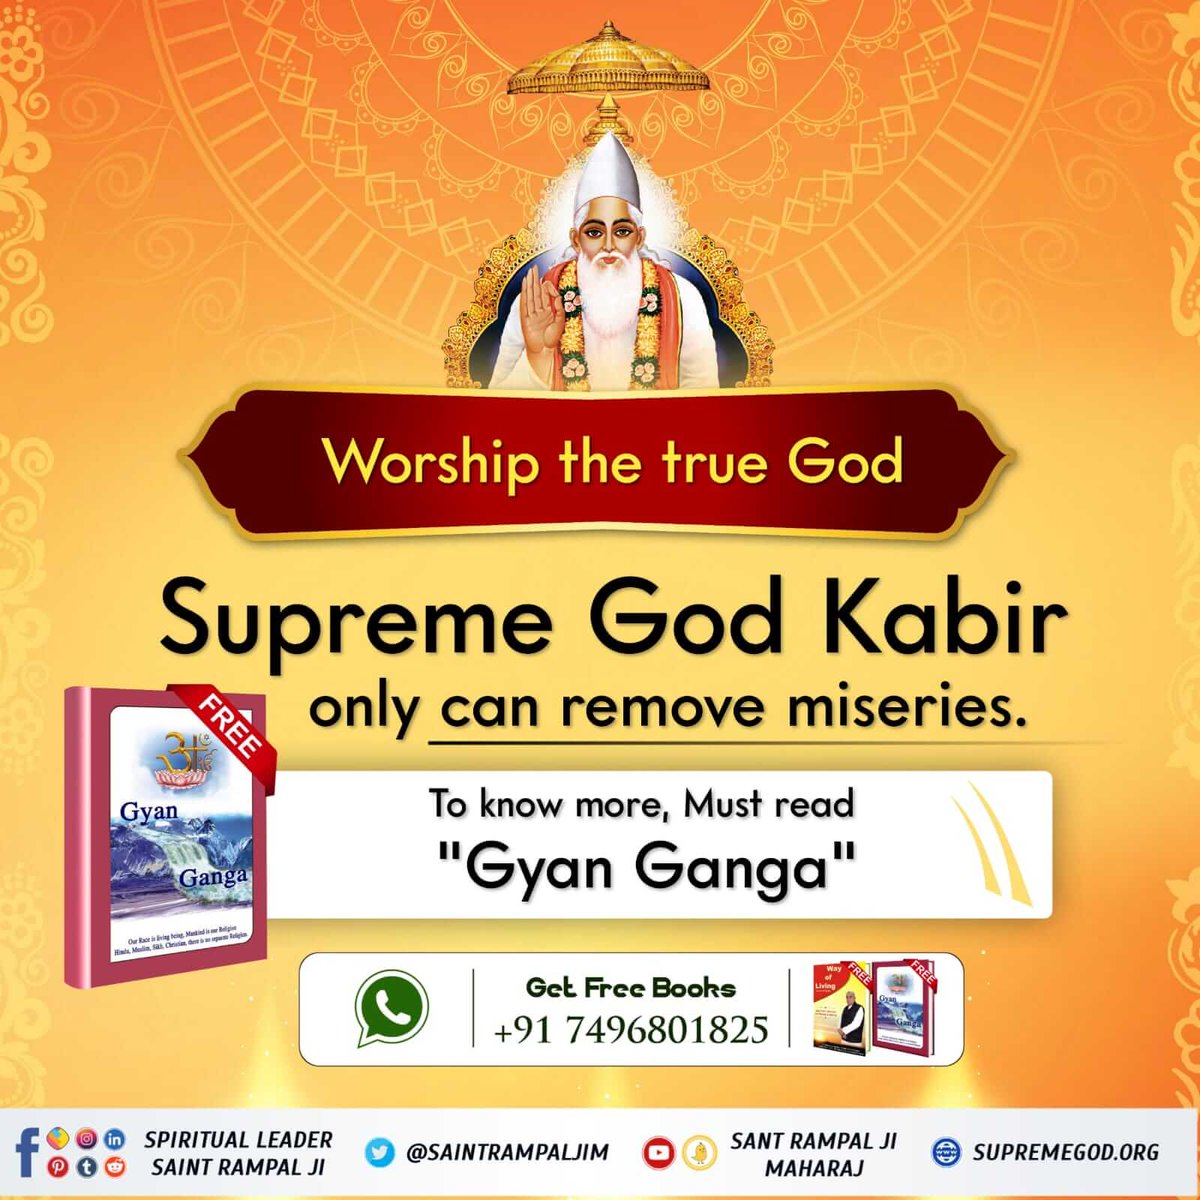 #GodMorningThursday
By worshipping the supreme God Kabir one attains complete salvation. Without salvation one remains in the cycle of birth and death.
#ThursdayThoughts
#ThursdayMotivation